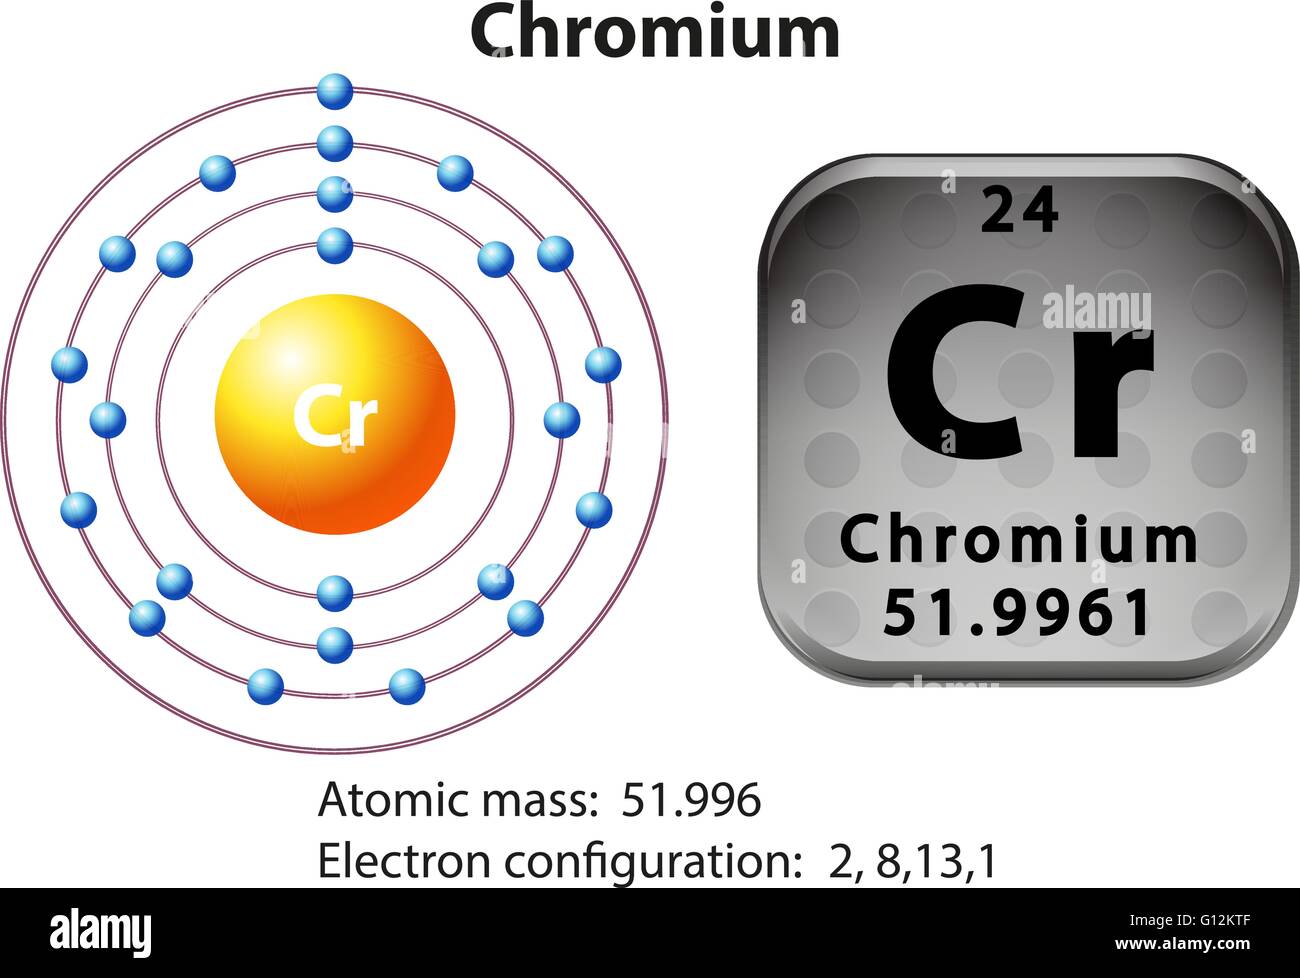 Chromium Atom High Resolution Stock Photography and Images - Alamy